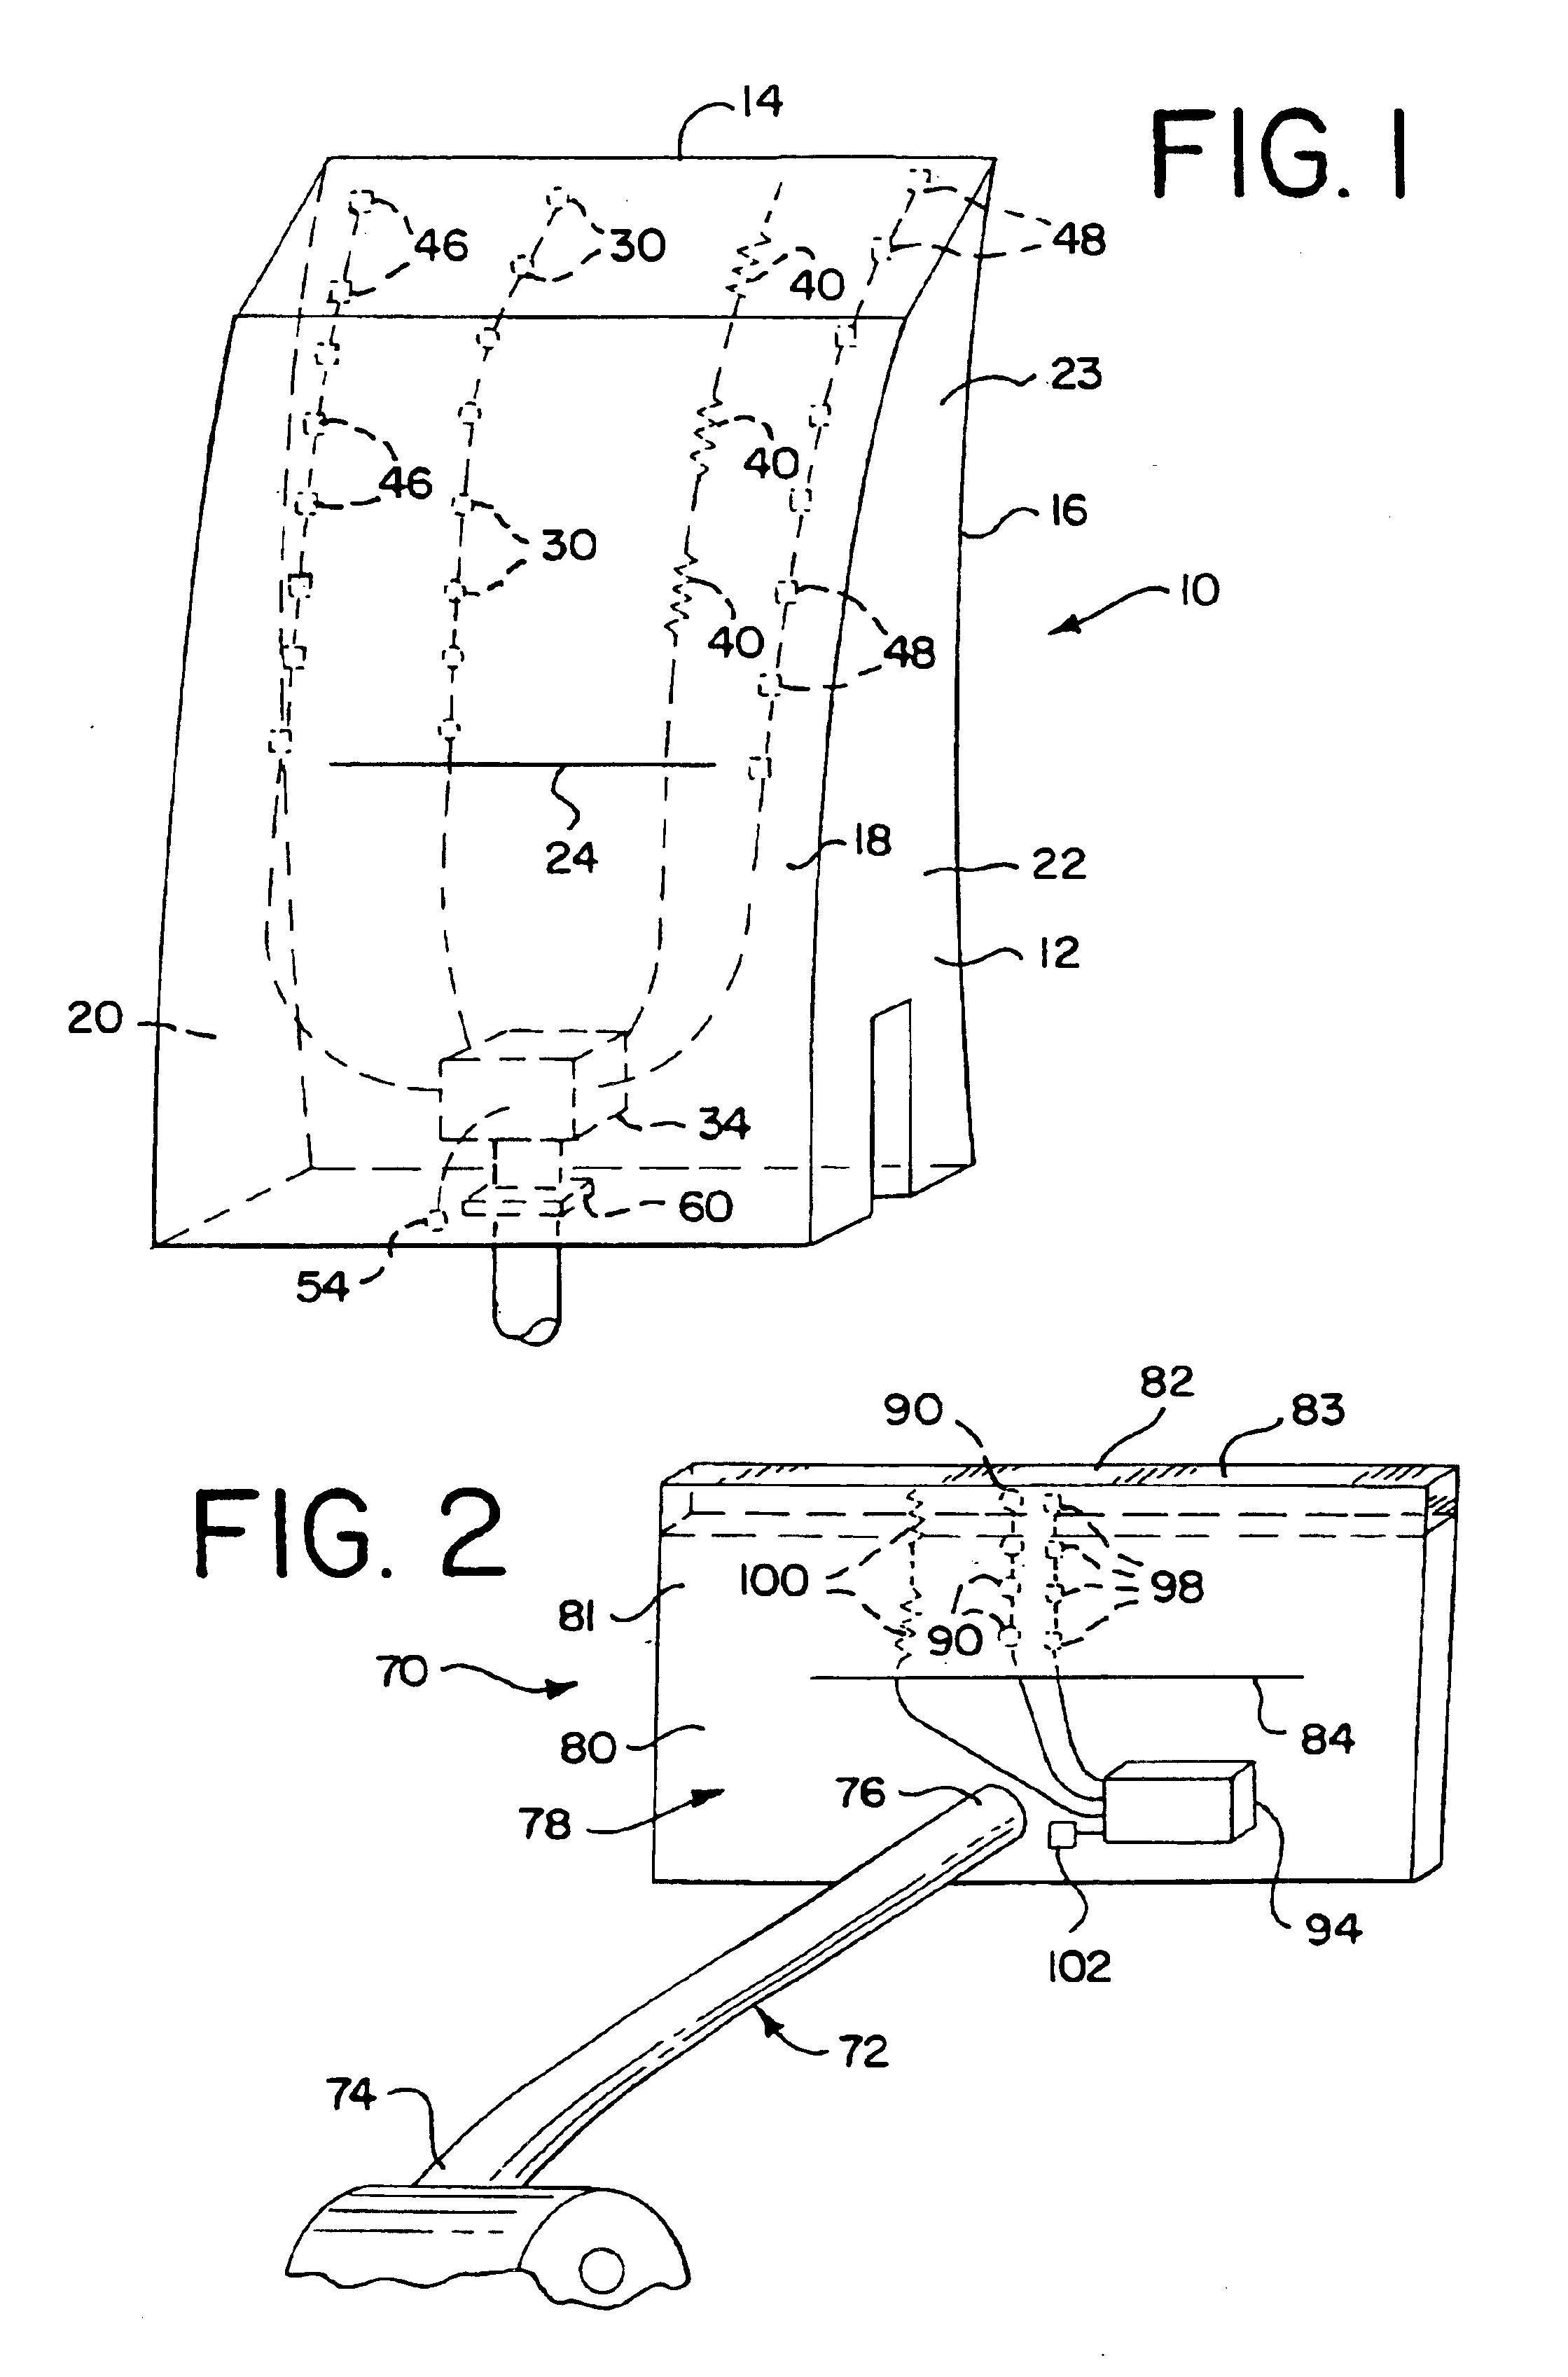 Conveyor belt cleaner scraper blade with sensor and control system therefor